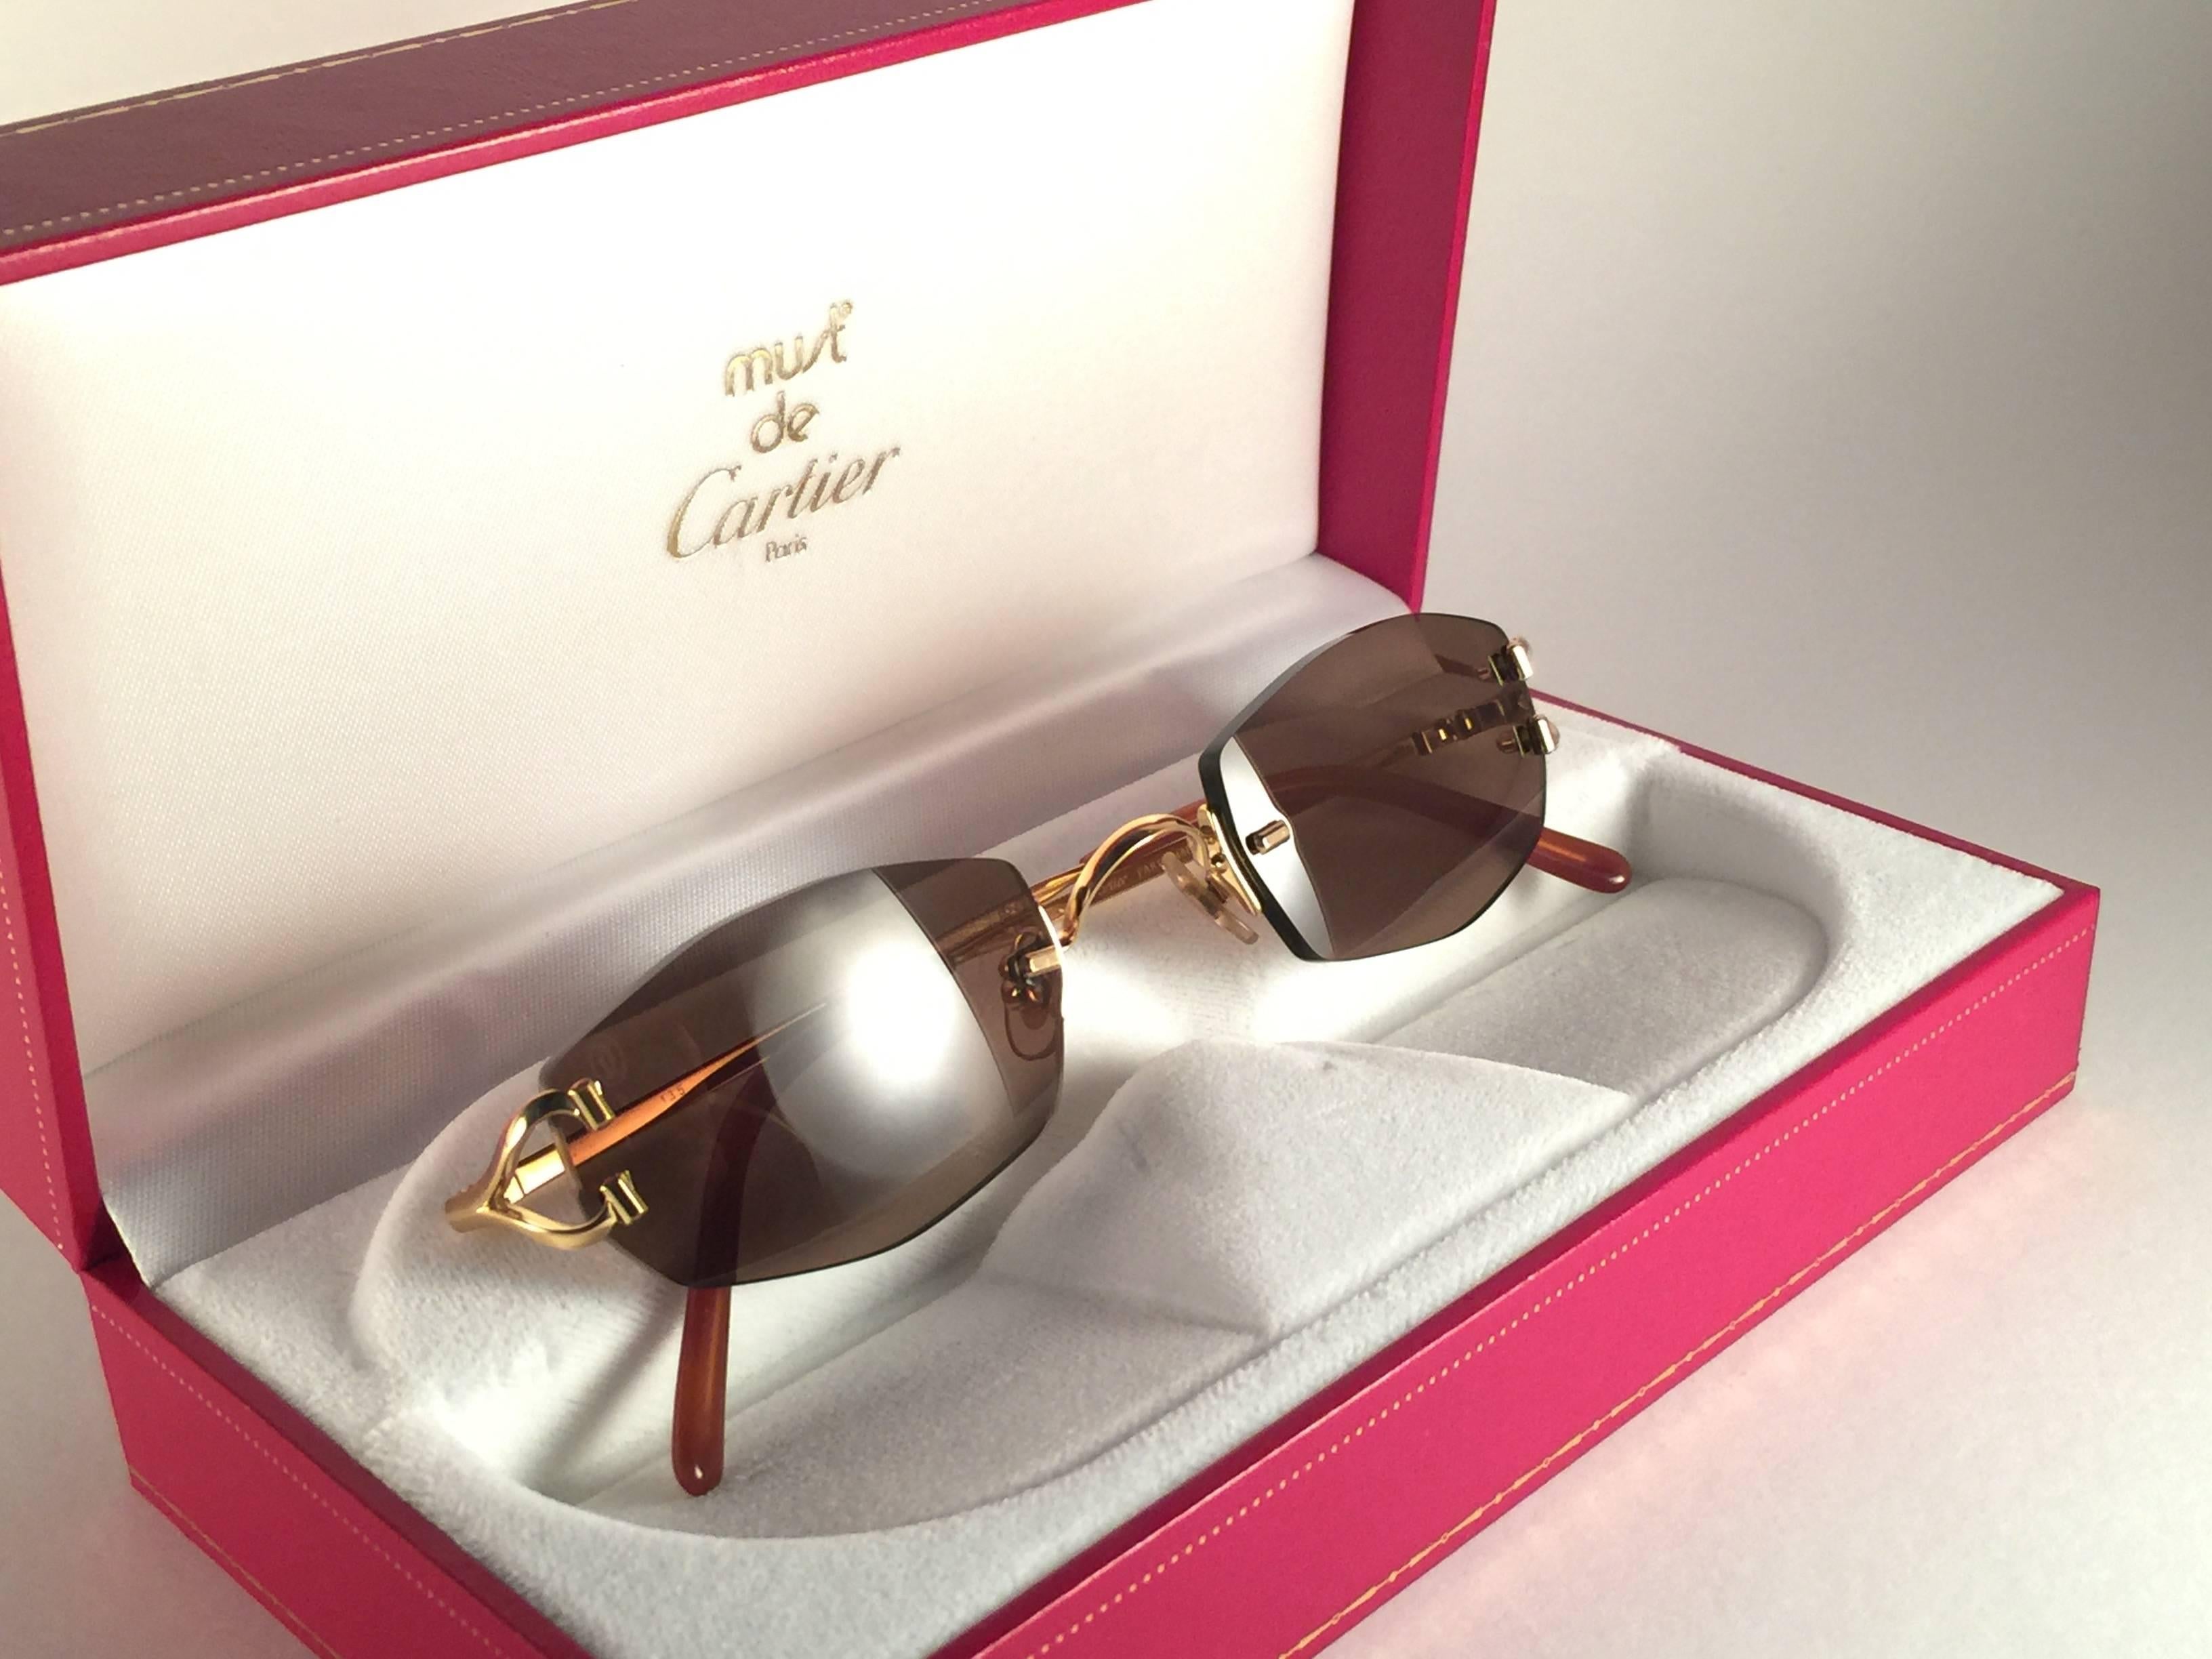 New 1990 Cartier Capri unique rimless sunglasses with brown original Cartier  (uv protection) lenses. Frame with the front and sides in gold.  All hallmarks. Cartier gold signs on the honey brown ear paddles. These are like a pair of jewels on your